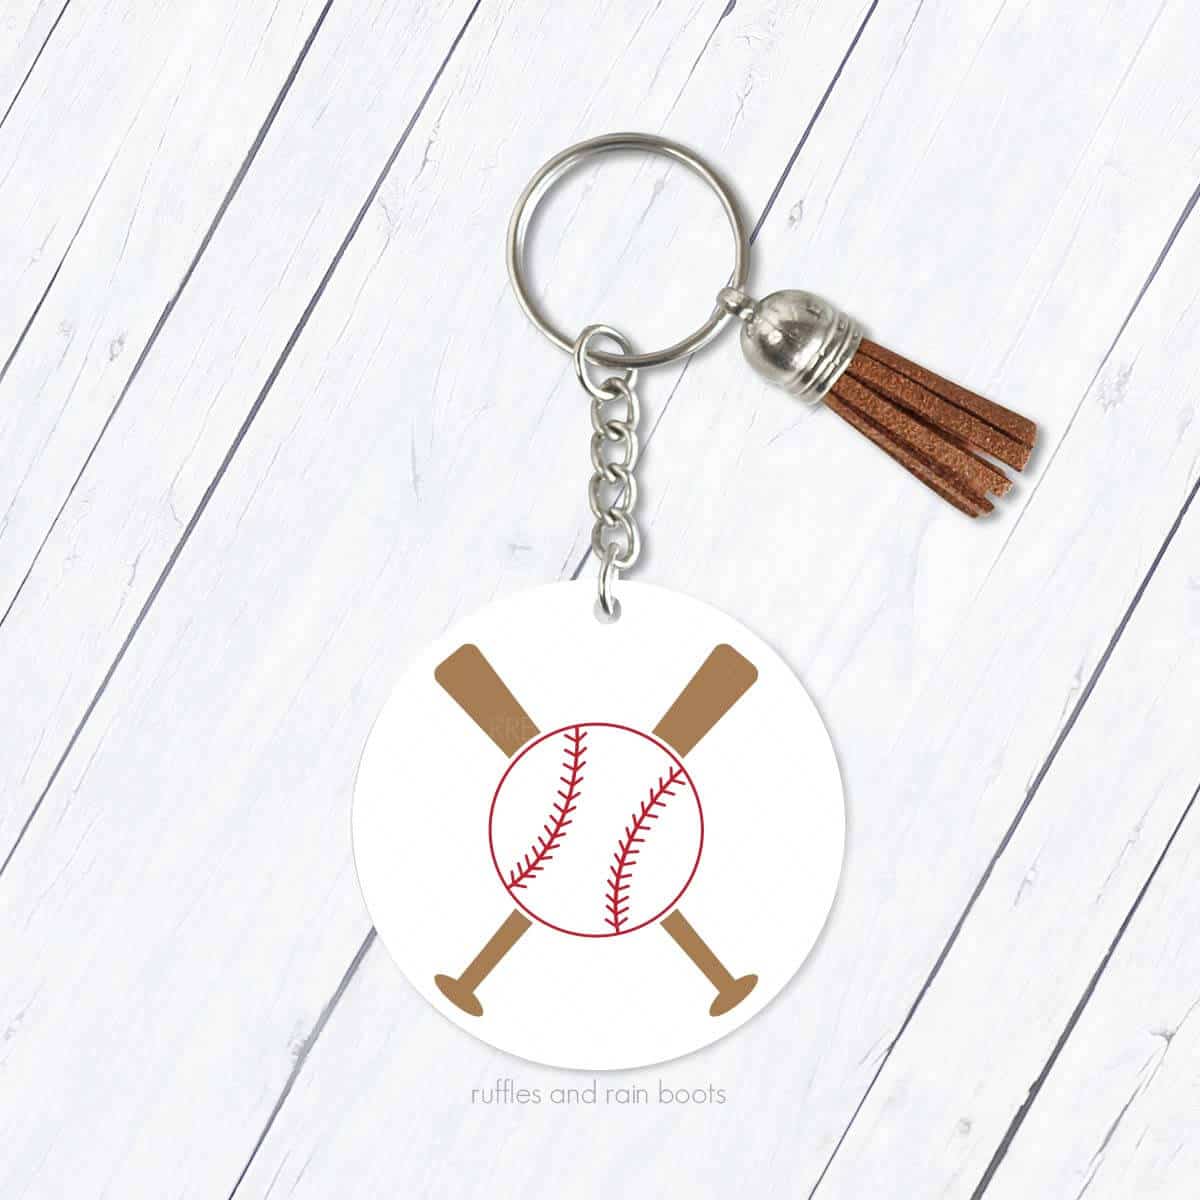 Square close up image of a white acrylic keychain with baseball and crossed bats SVG on wood background.